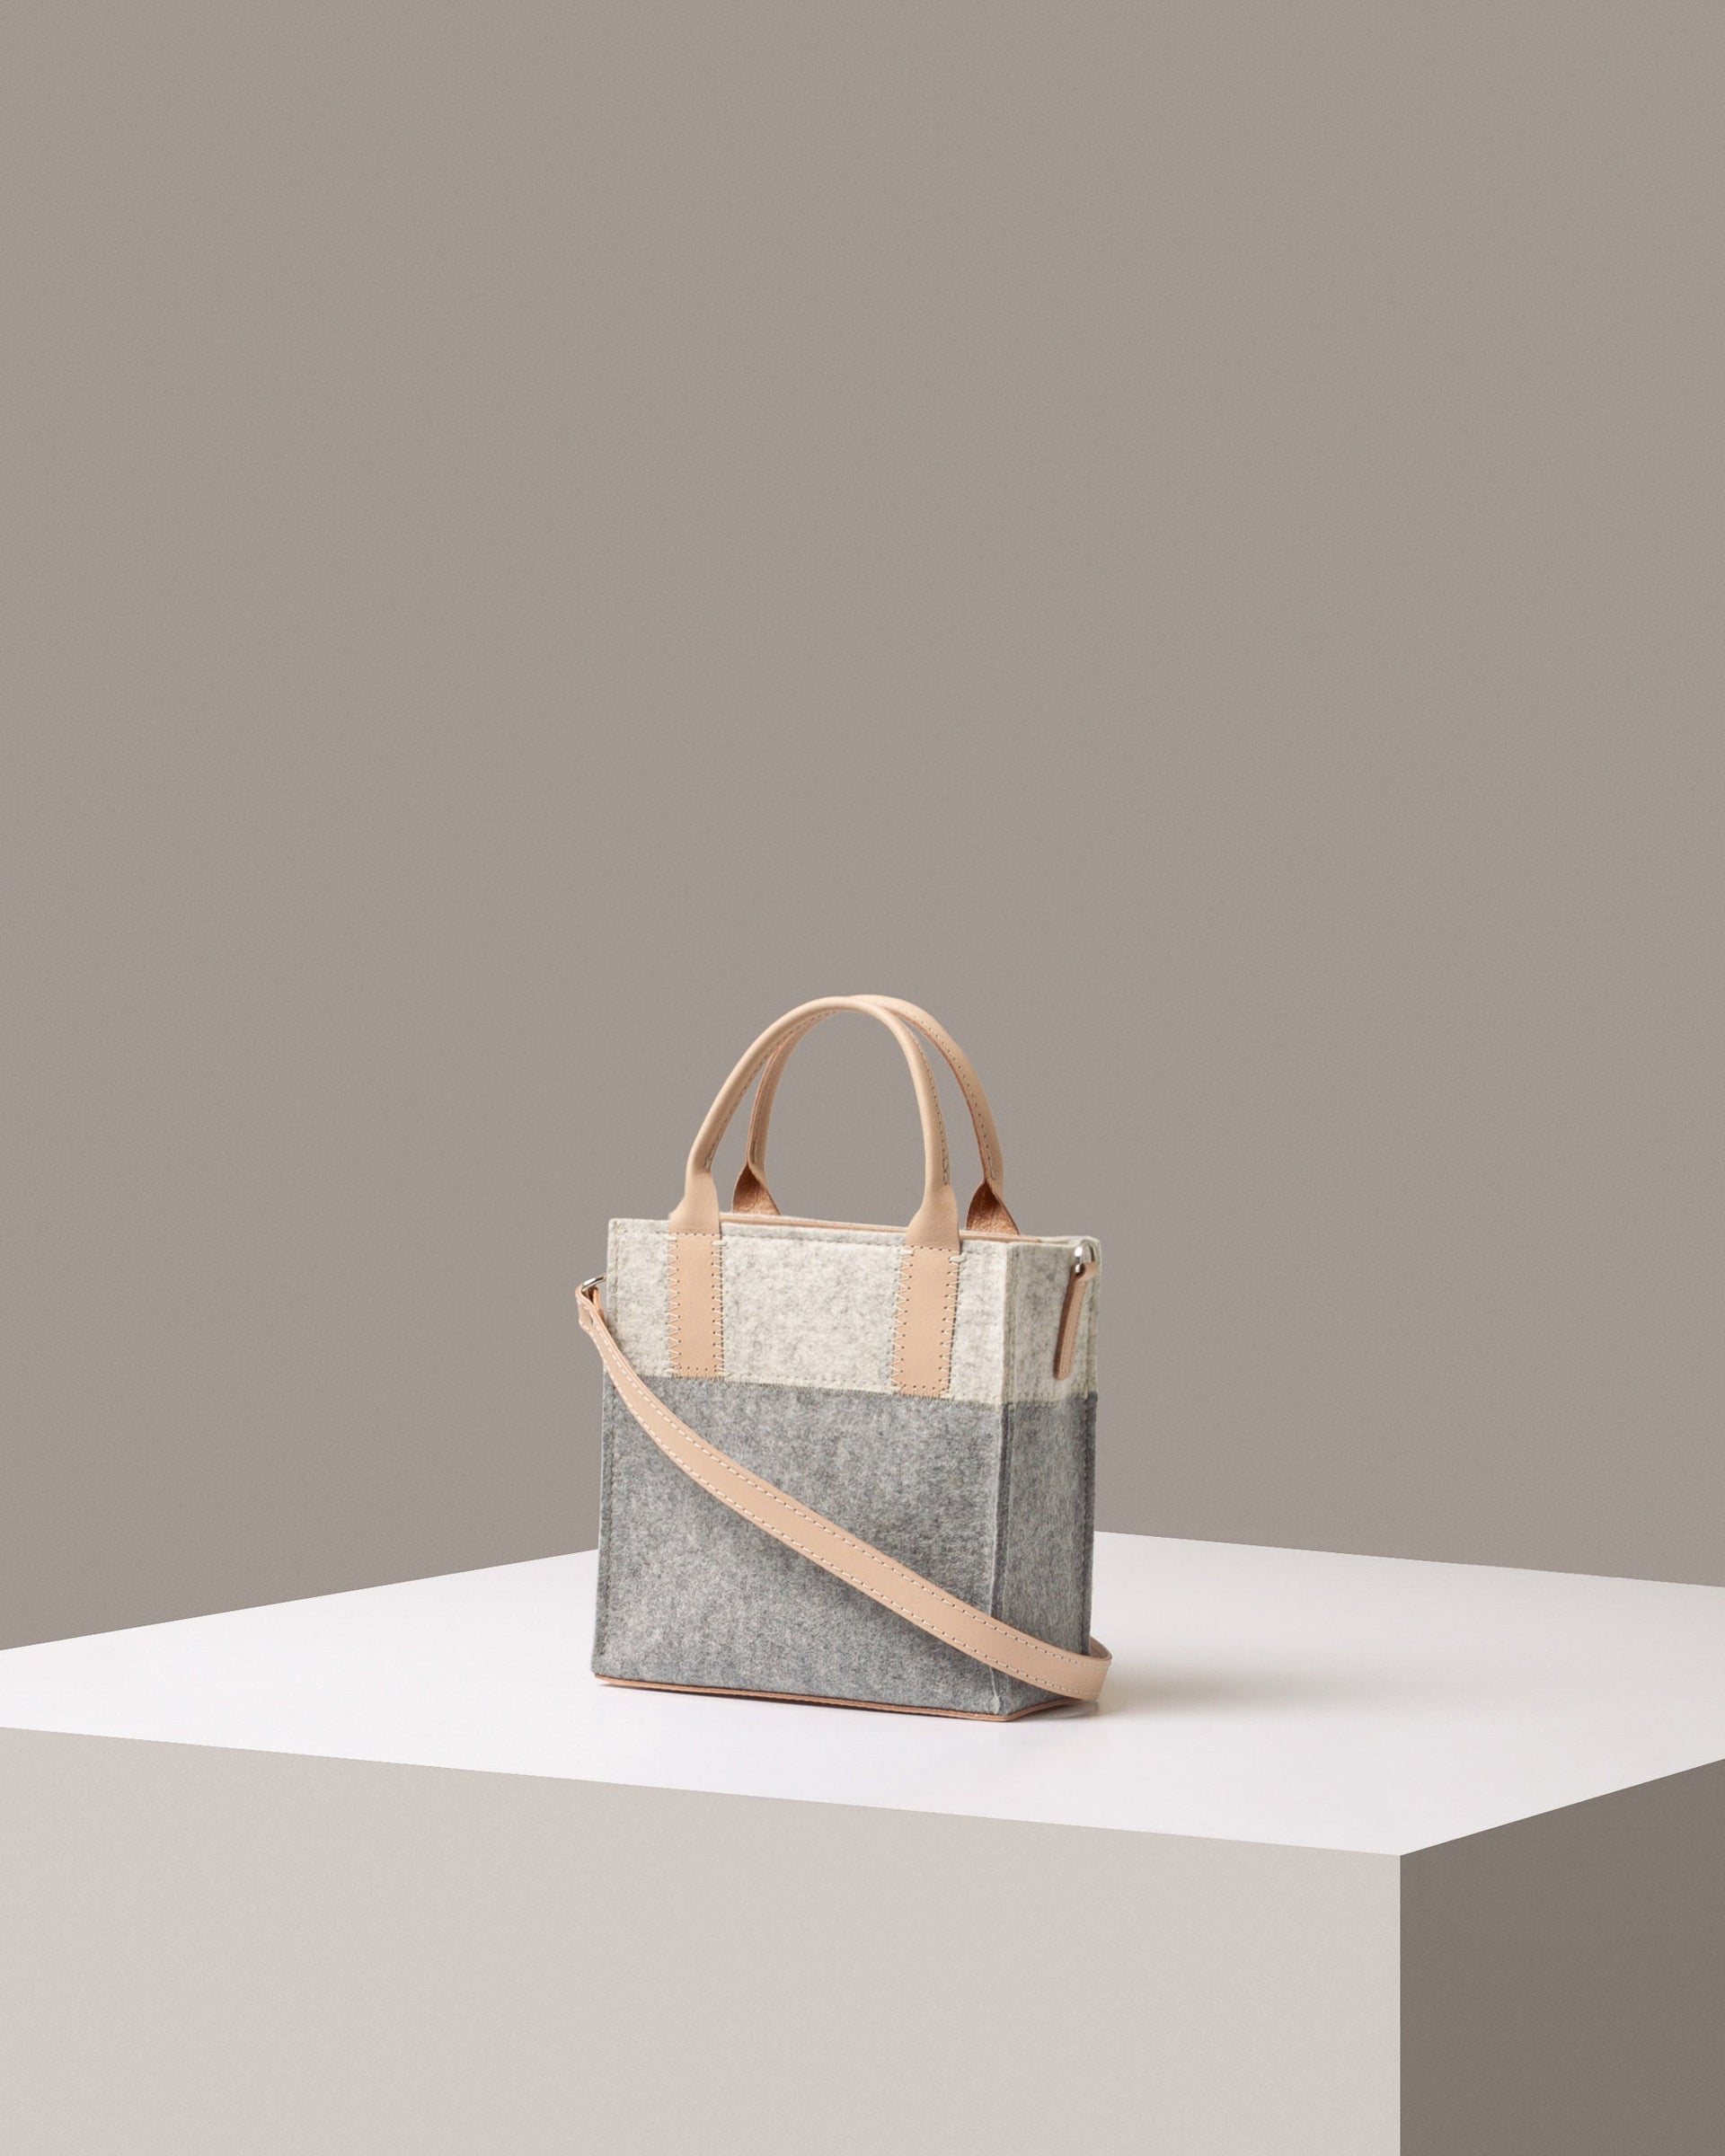 A stylish Jaunt Mini Merino Wool Felt Crossbody bag in white, gray, and beige colors, displayed in a three-quarter view on a white base